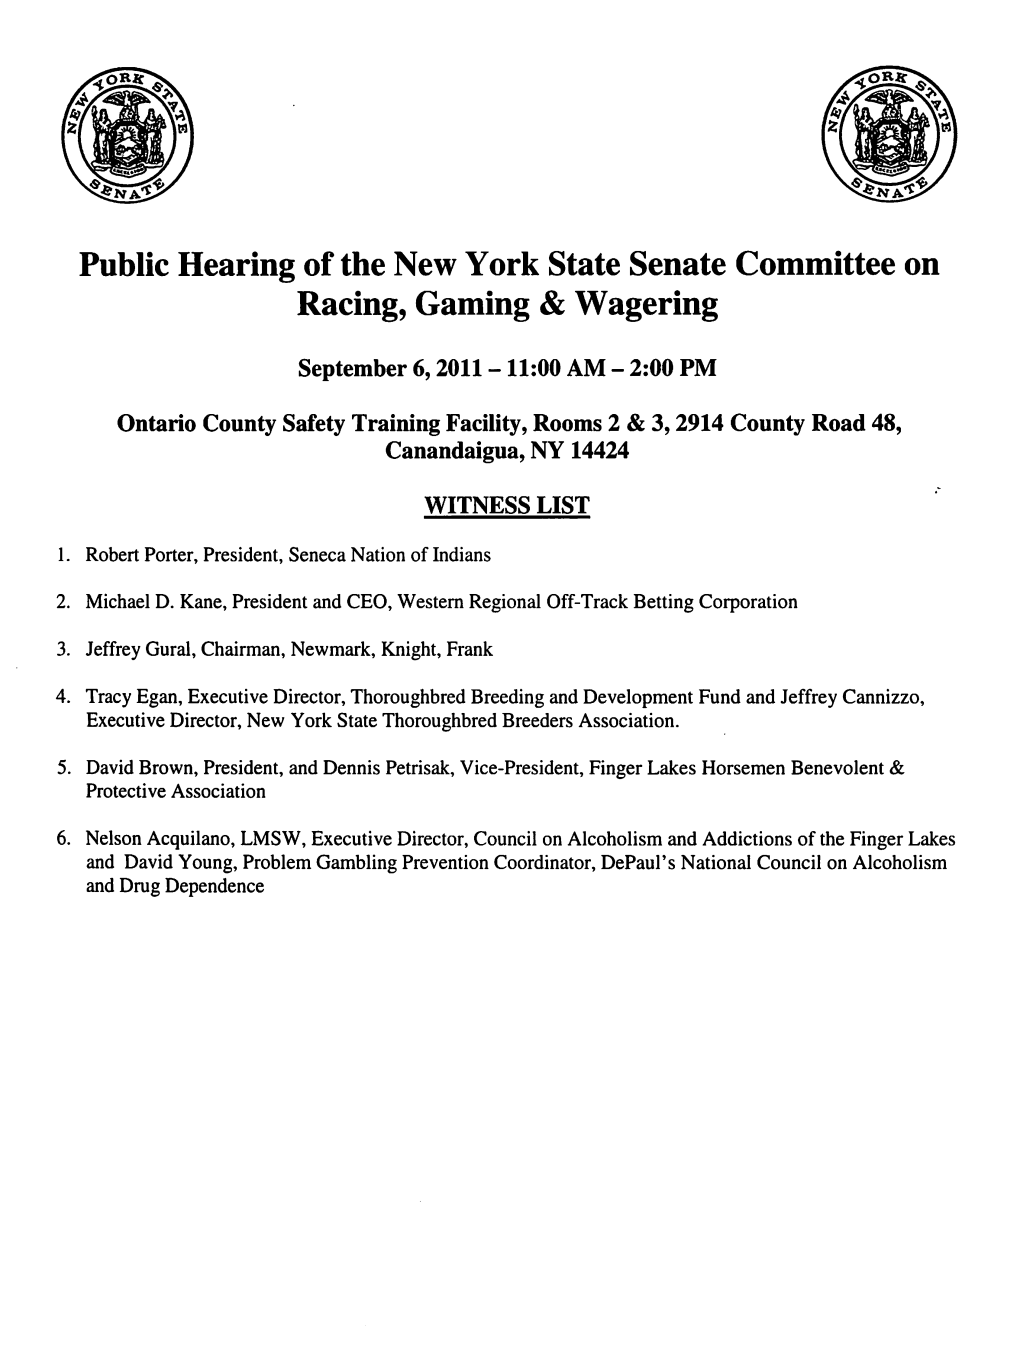 Public Hearing of the New York State Senate Committee on Racing, Gaming & Wagering